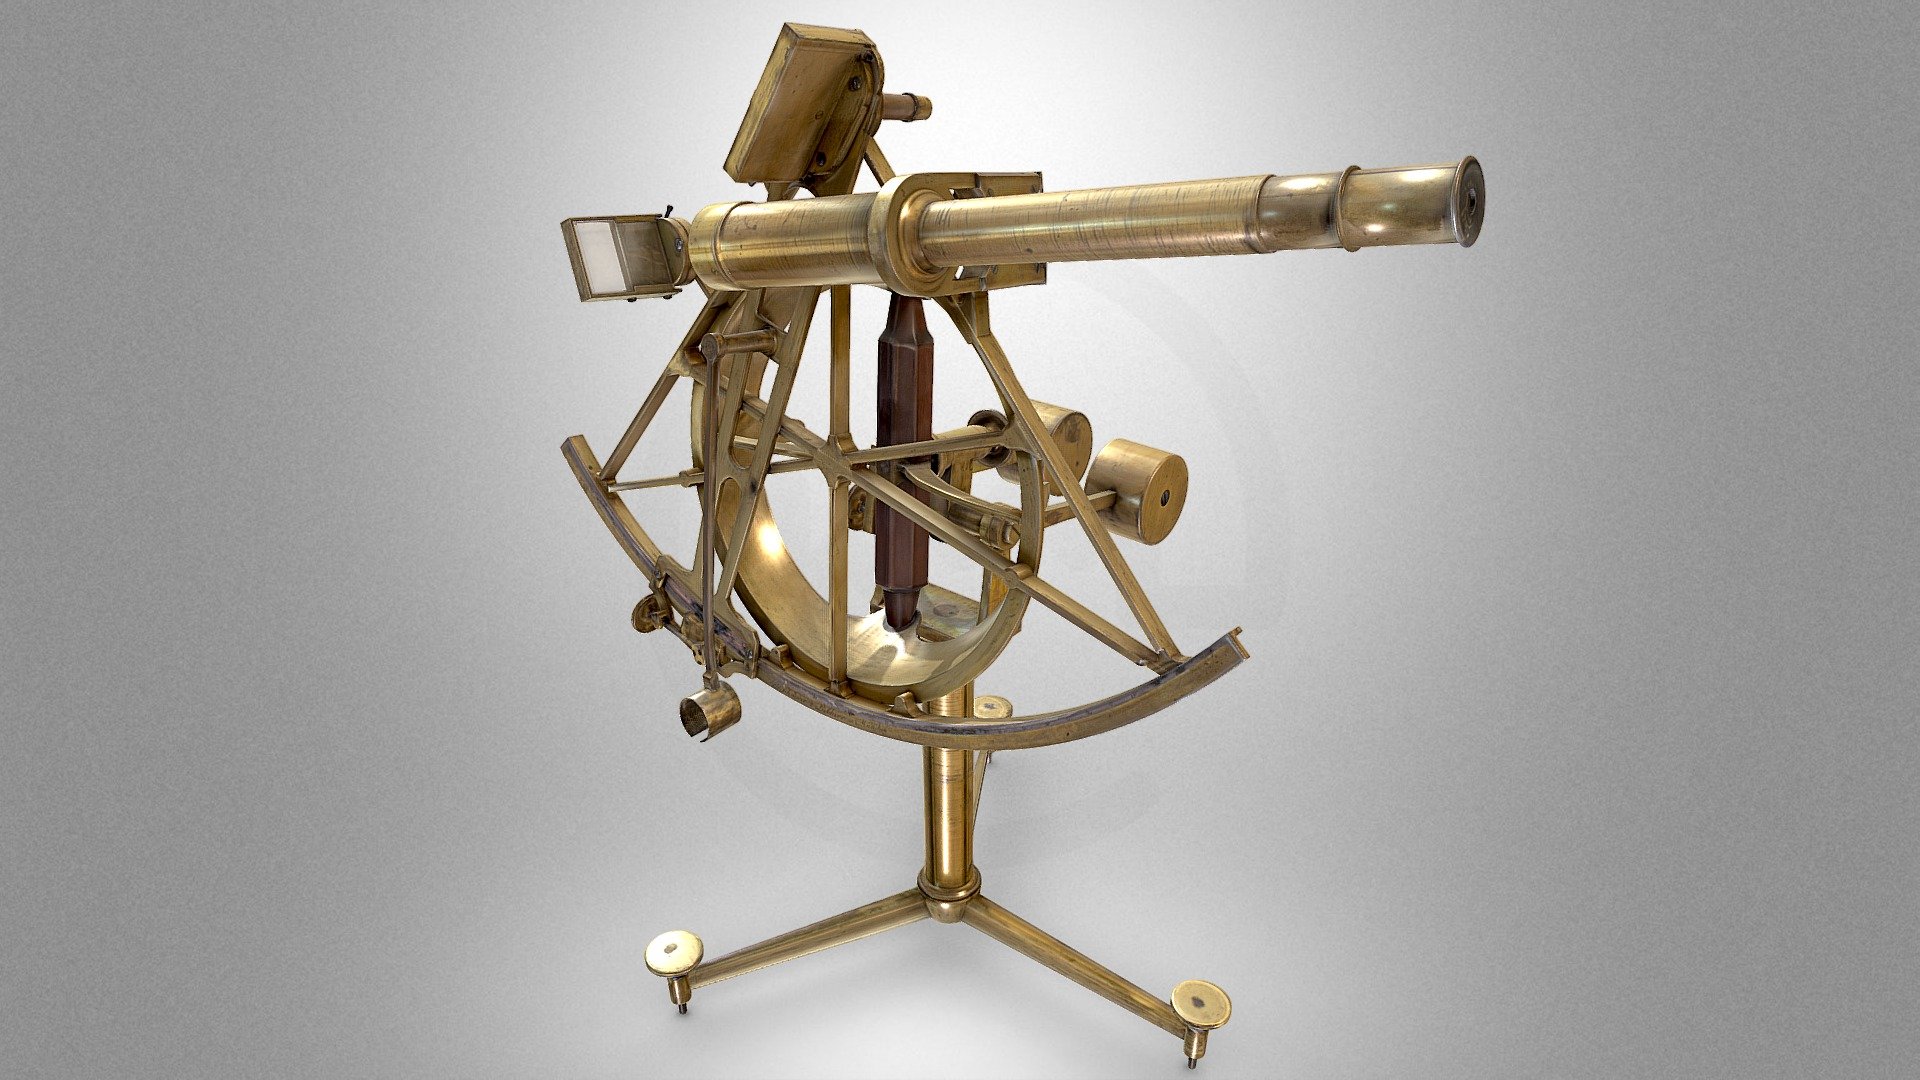 Astronomical quintant

Joseph von Utzschneider – artist / maker
Joseph Liebherr – artist / maker

1st half of the 19th century, Munich, Germany
Jagiellonian University Museum, Collegium Maius

This item is an observational astronomical instrument used to determine the altitude of celestial bodies above the horizon. It consists of a frame restricted by two radiuses and an arc with a scale, an observation telescope, and a mirror system. The arc of the quintant is the fifth part of a circle, hence its name, analogous to quadrants, sextants, and octants (based on the fourth, sixth, and eighth parts of a circle, respectively).

For more images and further information, visit: https://muzea.malopolska.pl/en/objects-list/2779

Inventory number: 4103; 103/V

Localisation of the physical object: Archaeological Museum in Kraków

Digitalisation: Regional Digitalisation Lab, Małopolska Institute of Culture in Kraków, Poland; “Virtual Museums of Małopolska” Project - Astronomical quintant - Download Free 3D model by Virtual Museums of Małopolska (@WirtualneMuzeaMalopolski) 3d model